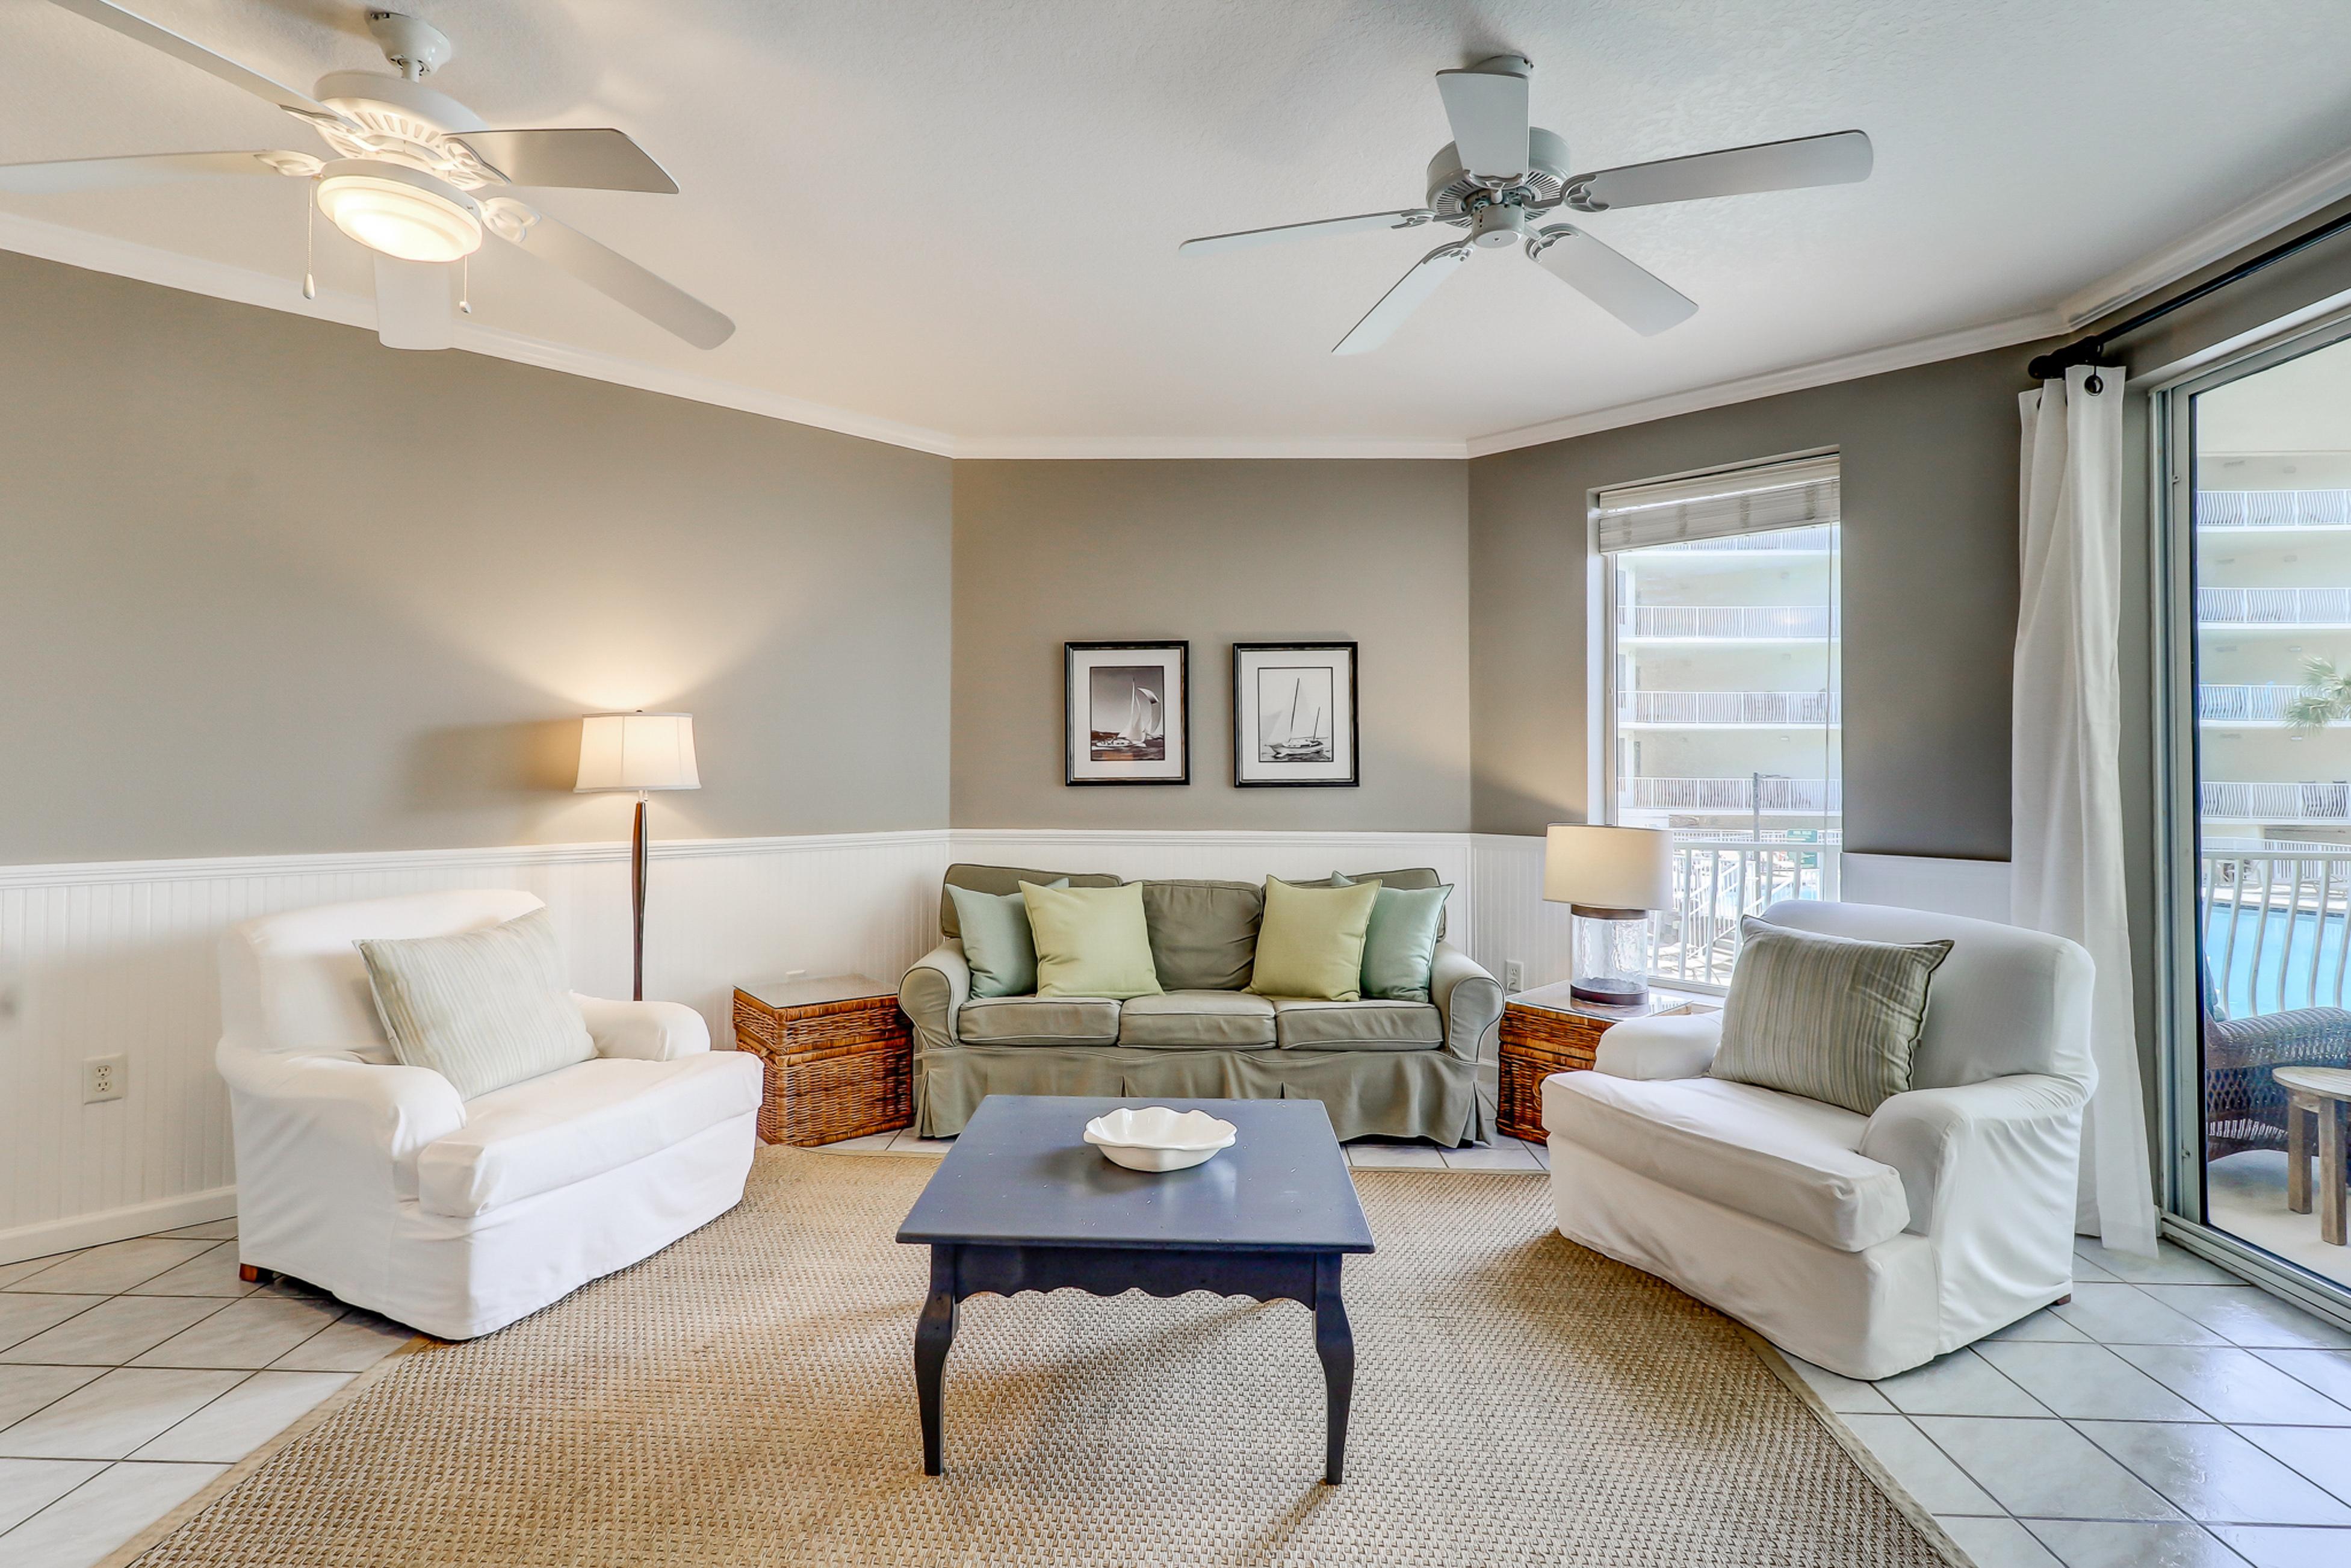 Property Image 1 - Dunes of Seagrove B102